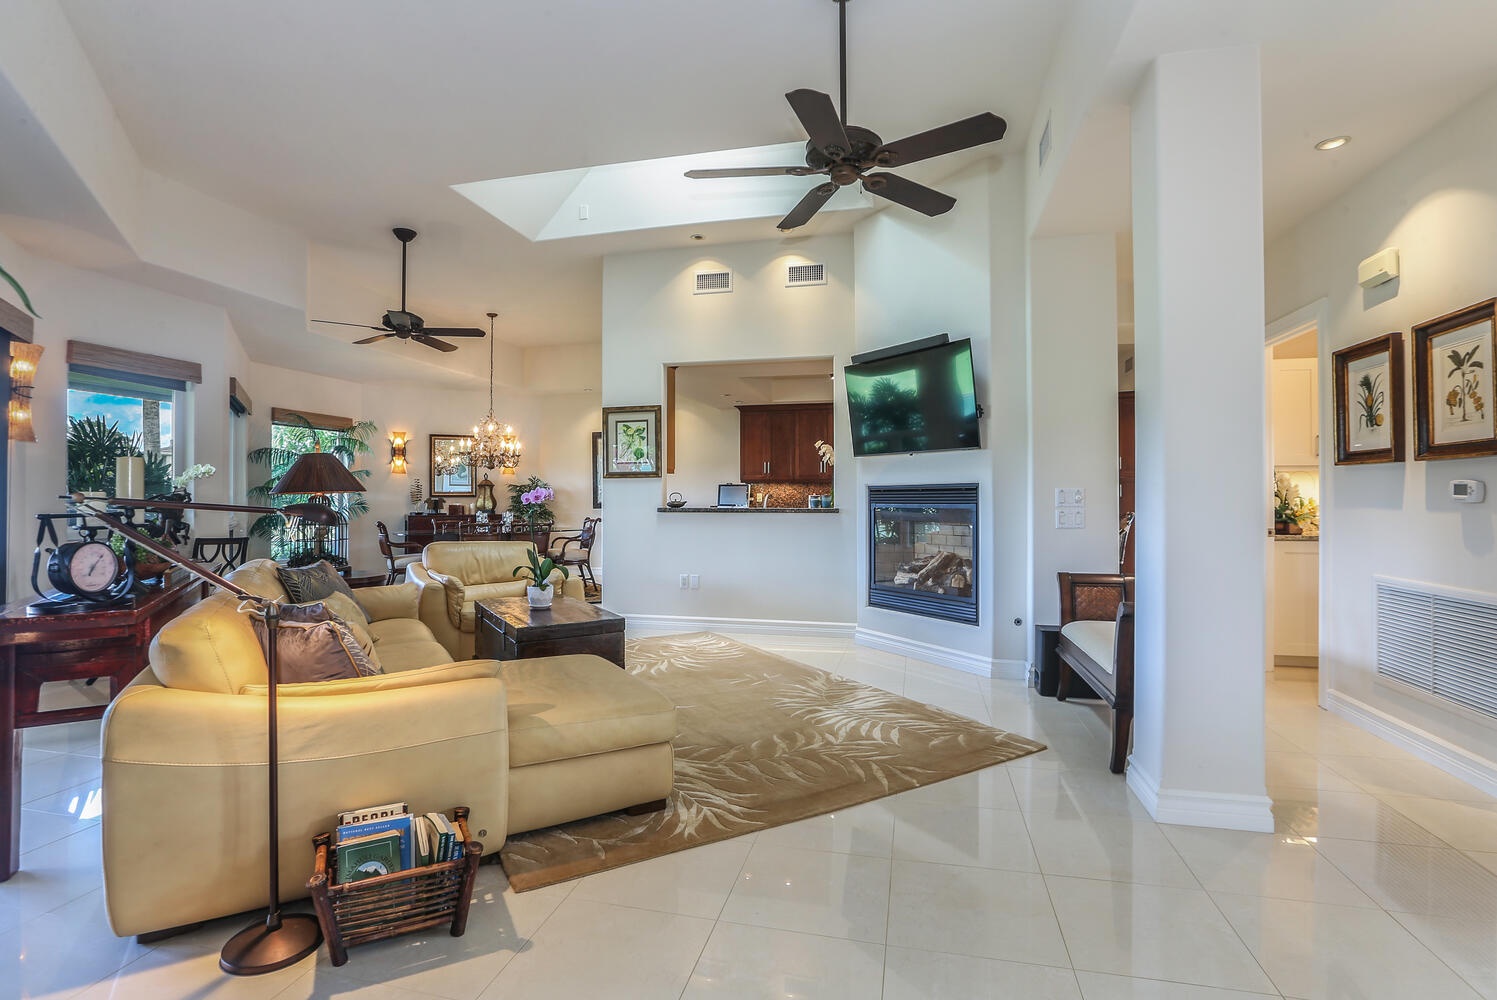 Princeville Vacation Rentals, Hale Moana - This home's open-concept floor plan is aptly fit for entertaining